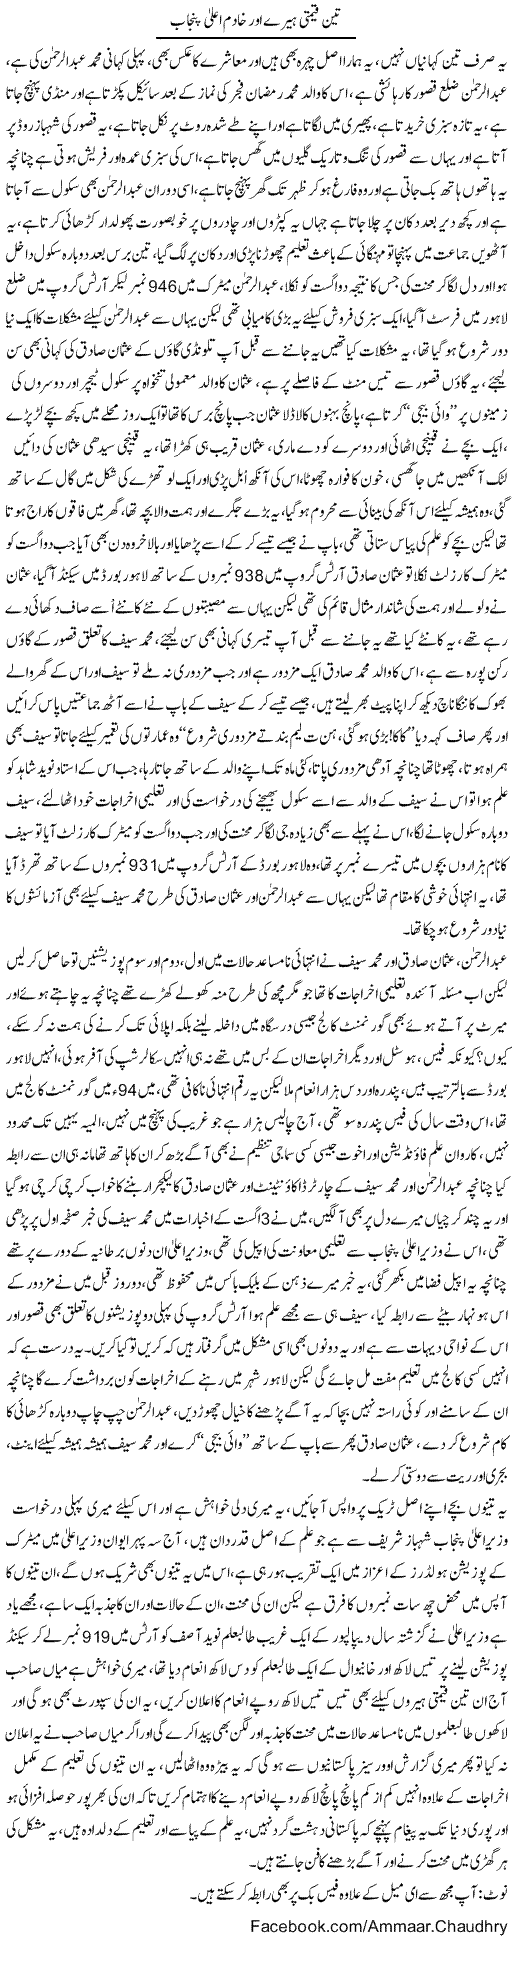 Mian Shahbaz Express Column Amad Chaudhry 21 August 2011